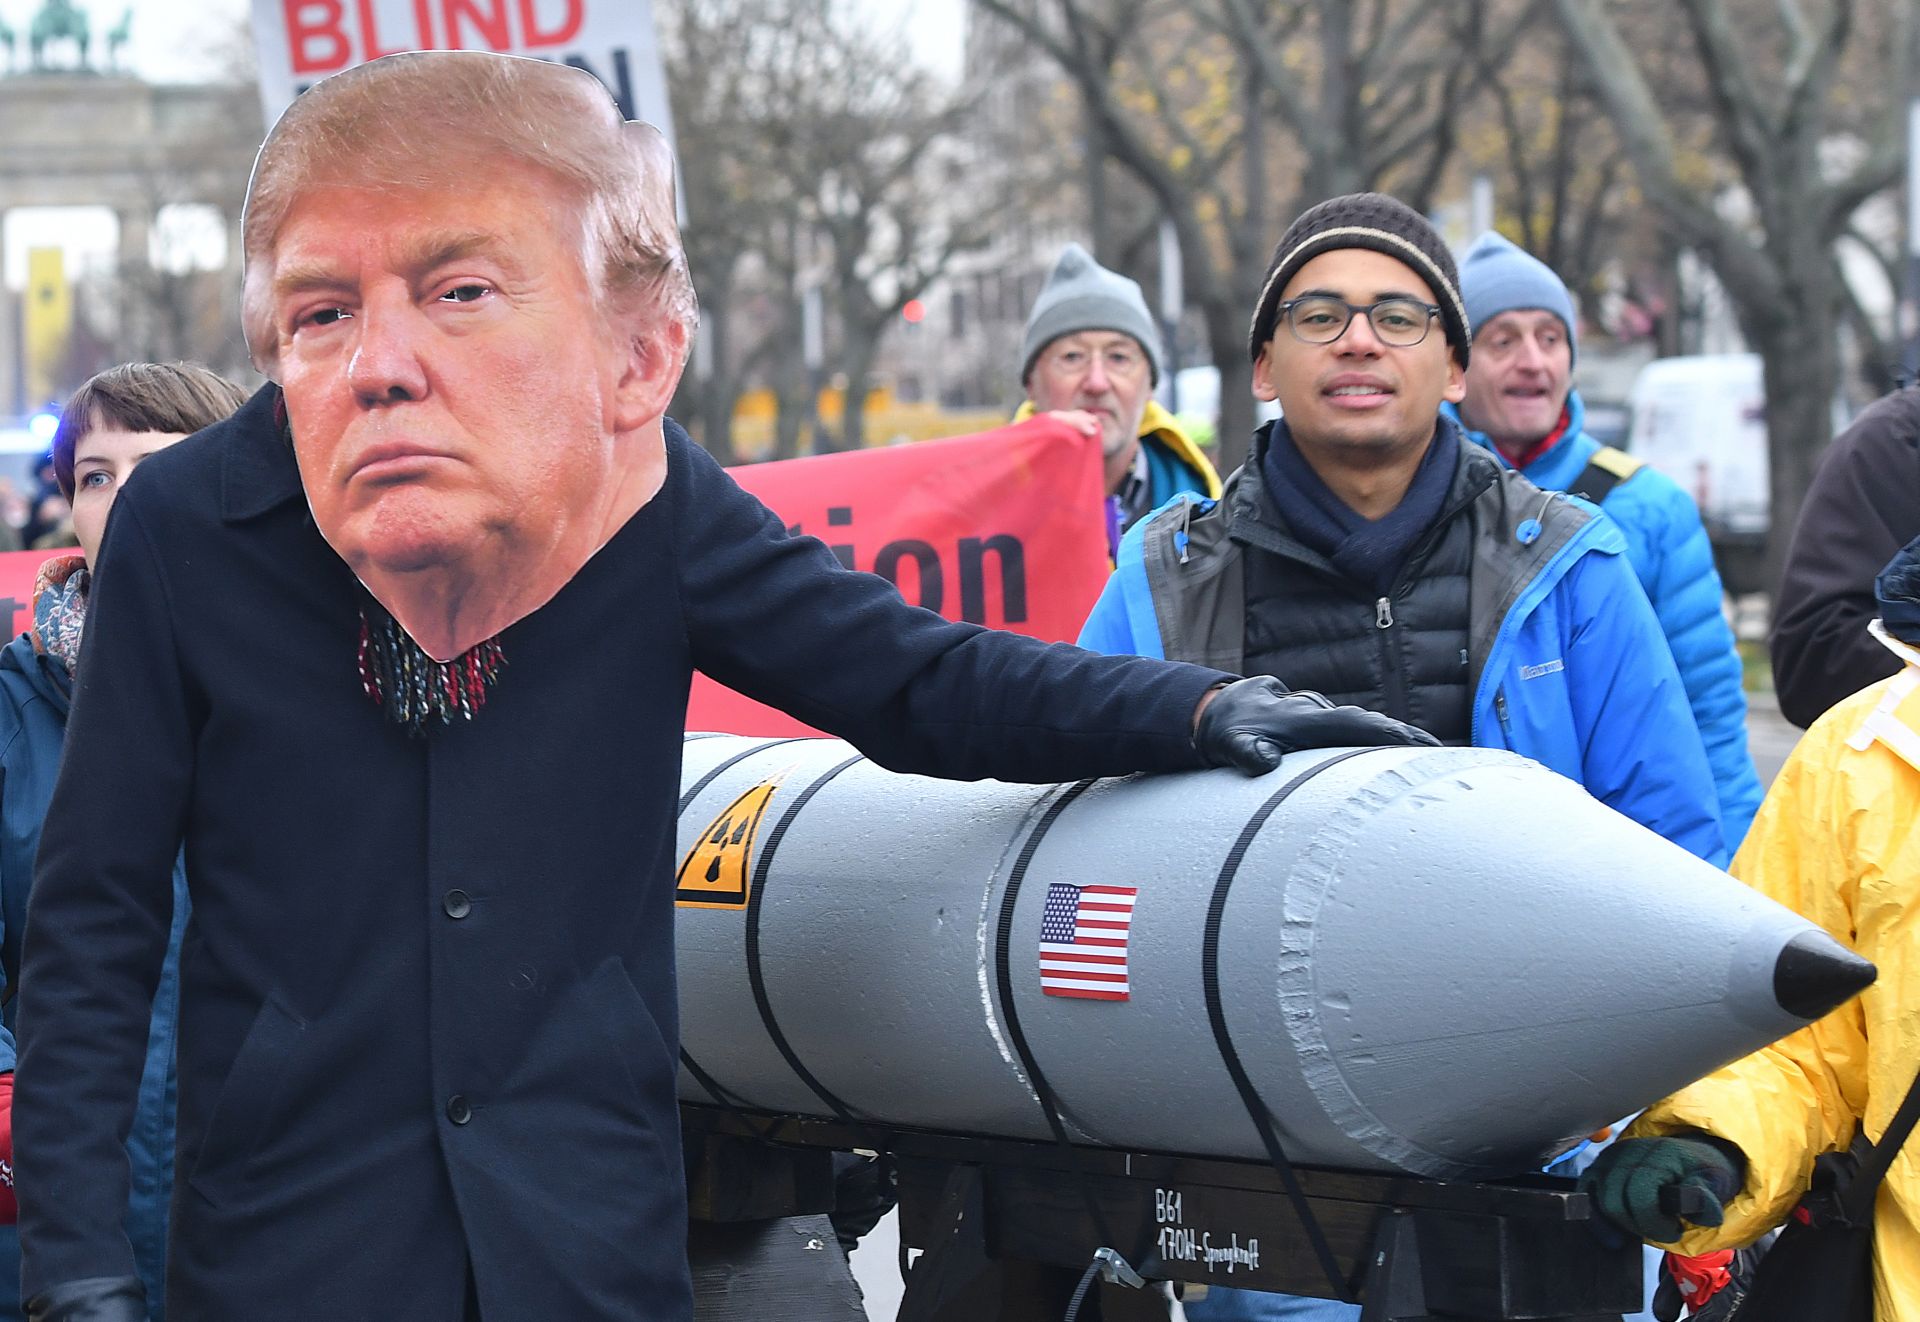 A protestor wearing a mask of US President Donald Trump puts his hands on a mock missile during a demonstration against nuclear weapons politics under the slogan "Stop the escalation - prohibit nuclear weapons!", in Berlin, Germany, 18 November 2017. Photo: Paul Zinken/dpa